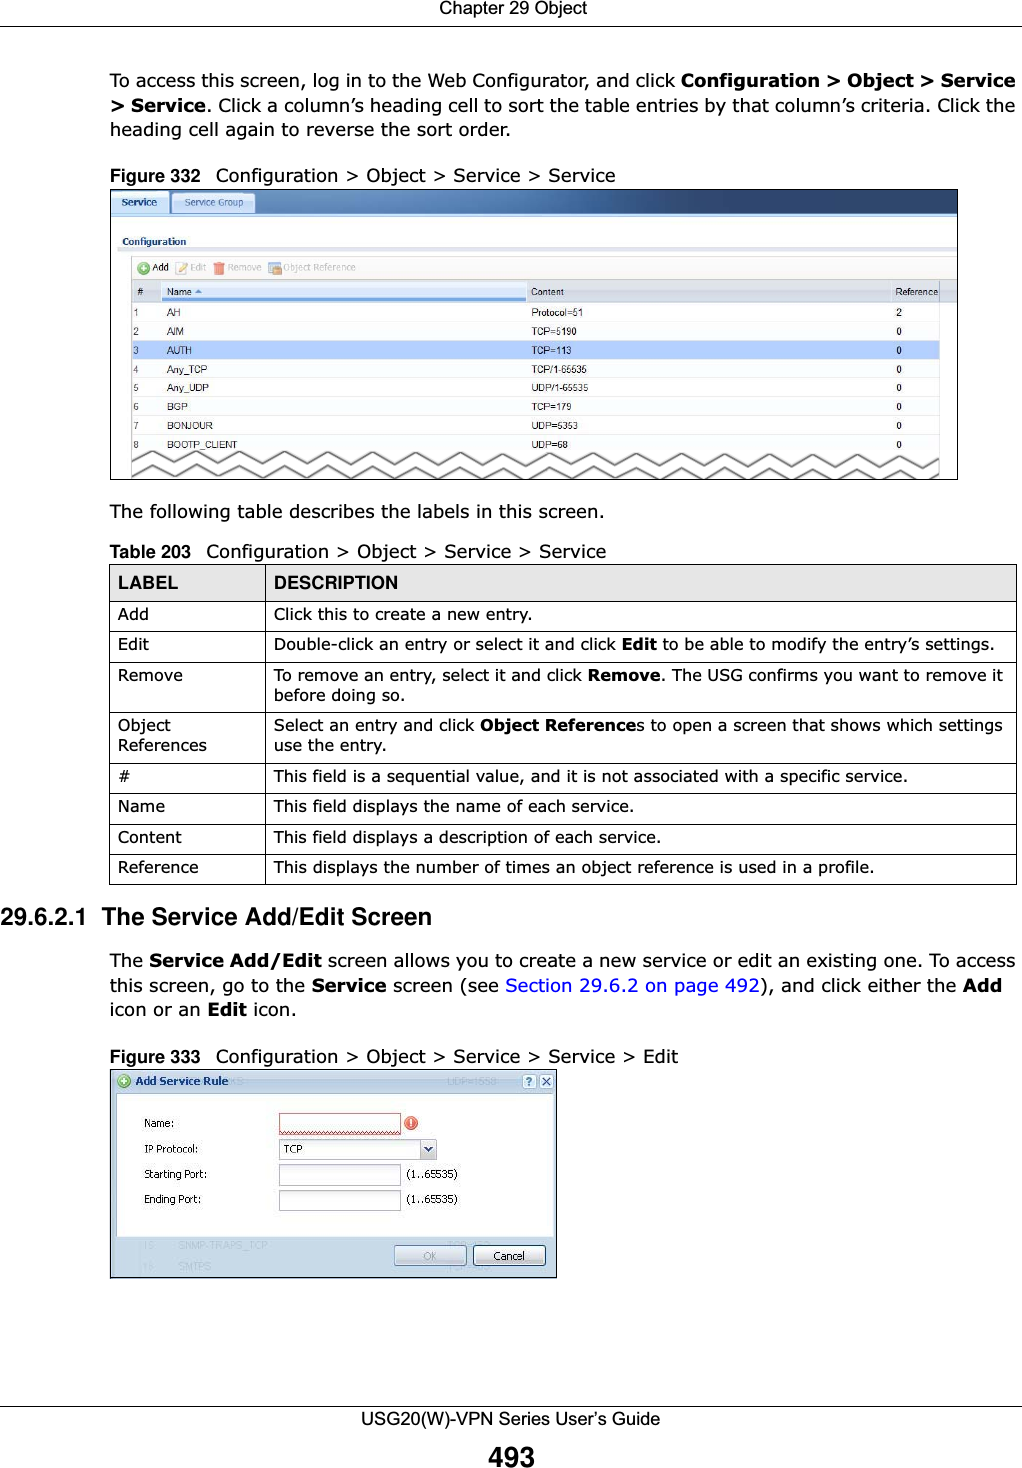  Chapter 29 ObjectUSG20(W)-VPN Series User’s Guide493To access this screen, log in to the Web Configurator, and click Configuration &gt; Object &gt; Service &gt; Service. Click a column’s heading cell to sort the table entries by that column’s criteria. Click the heading cell again to reverse the sort order.Figure 332   Configuration &gt; Object &gt; Service &gt; ServiceThe following table describes the labels in this screen.  29.6.2.1  The Service Add/Edit ScreenThe Service Add/Edit screen allows you to create a new service or edit an existing one. To access this screen, go to the Service screen (see Section 29.6.2 on page 492), and click either the Add icon or an Edit icon.Figure 333   Configuration &gt; Object &gt; Service &gt; Service &gt; EditTable 203   Configuration &gt; Object &gt; Service &gt; ServiceLABEL DESCRIPTIONAdd Click this to create a new entry.Edit Double-click an entry or select it and click Edit to be able to modify the entry’s settings. Remove To remove an entry, select it and click Remove. The USG confirms you want to remove it before doing so.Object ReferencesSelect an entry and click Object References to open a screen that shows which settings use the entry. # This field is a sequential value, and it is not associated with a specific service.Name This field displays the name of each service.Content This field displays a description of each service.Reference This displays the number of times an object reference is used in a profile.